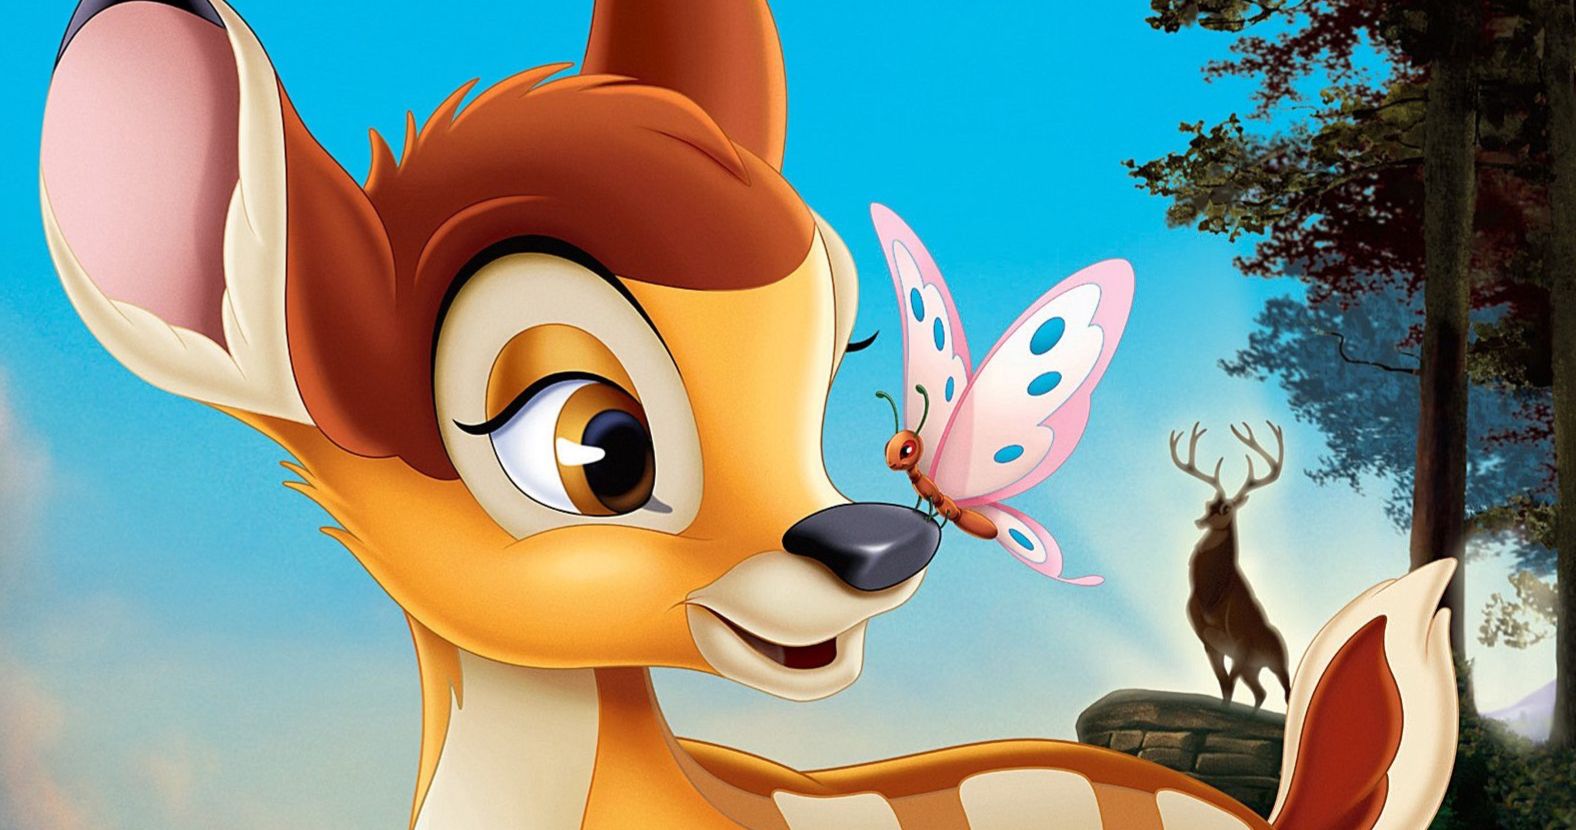 Disney's Bambi Is Getting a Remake with Captain Marvel and Chaos Walking Writers